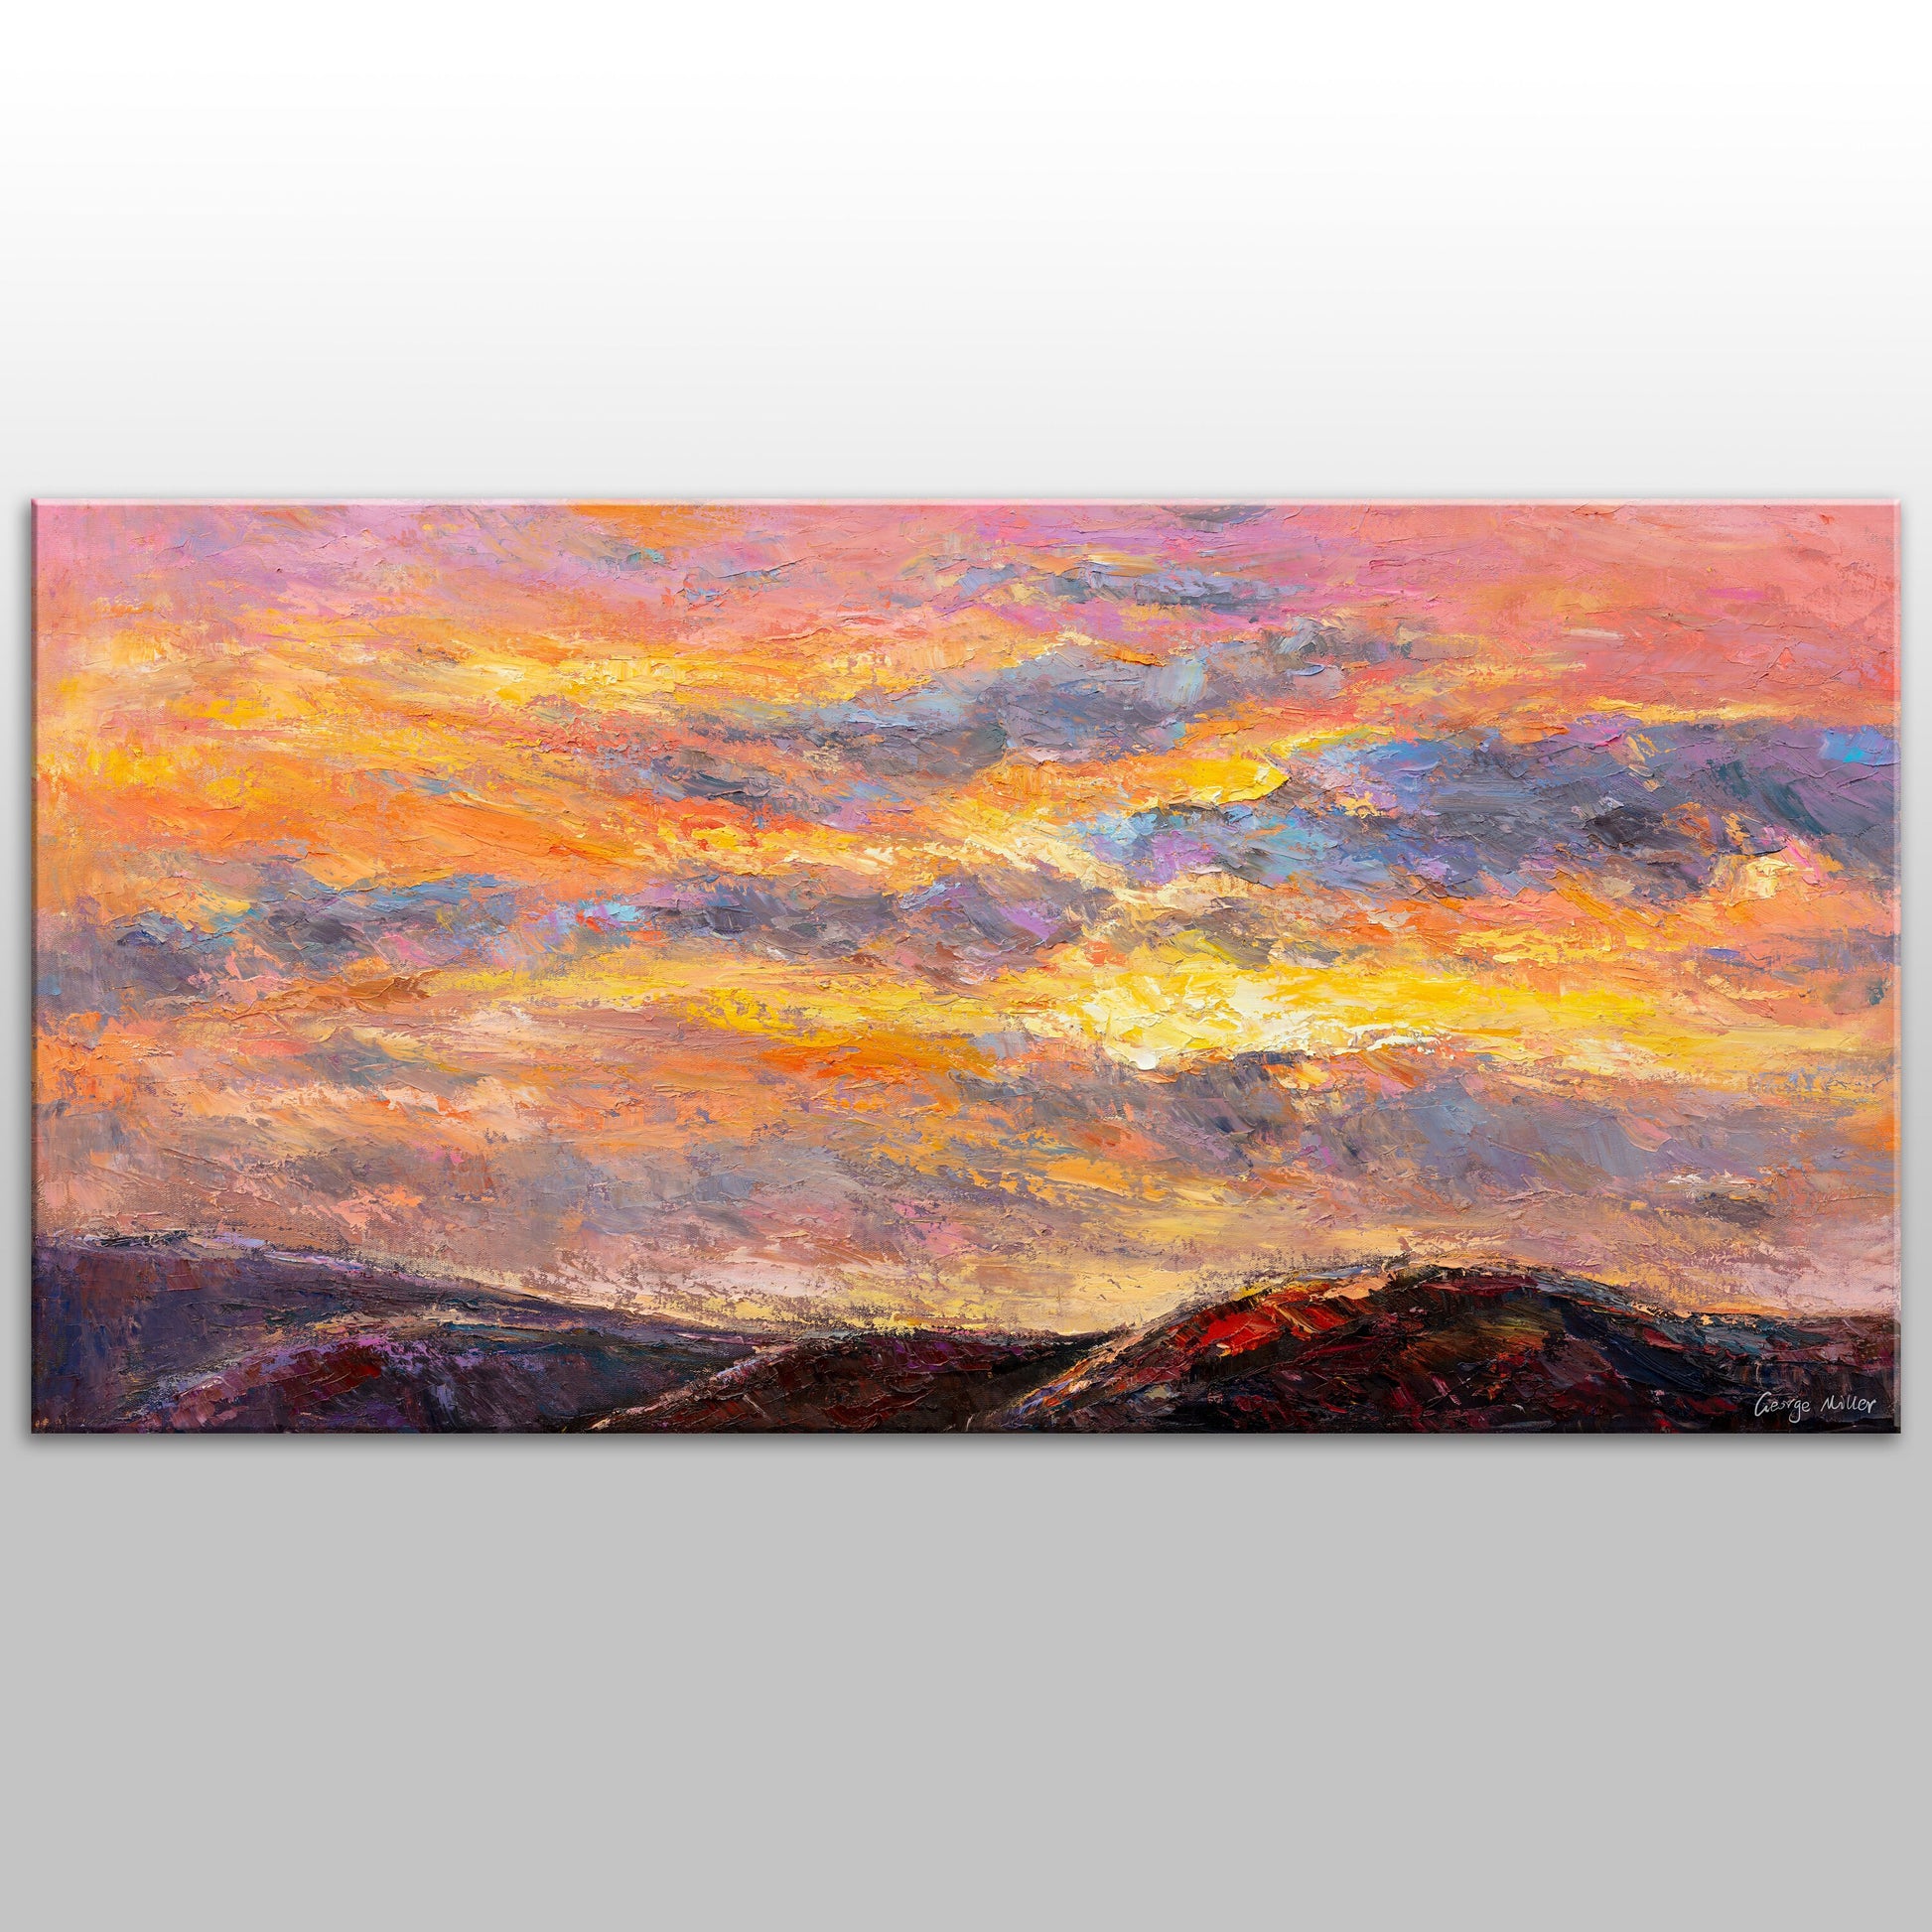 Abstract Painting Sunrise in the mountains, Oil Painting, Original Art, Modern Art, Canvas Painting, Abstract Painting, Modern Wall Art